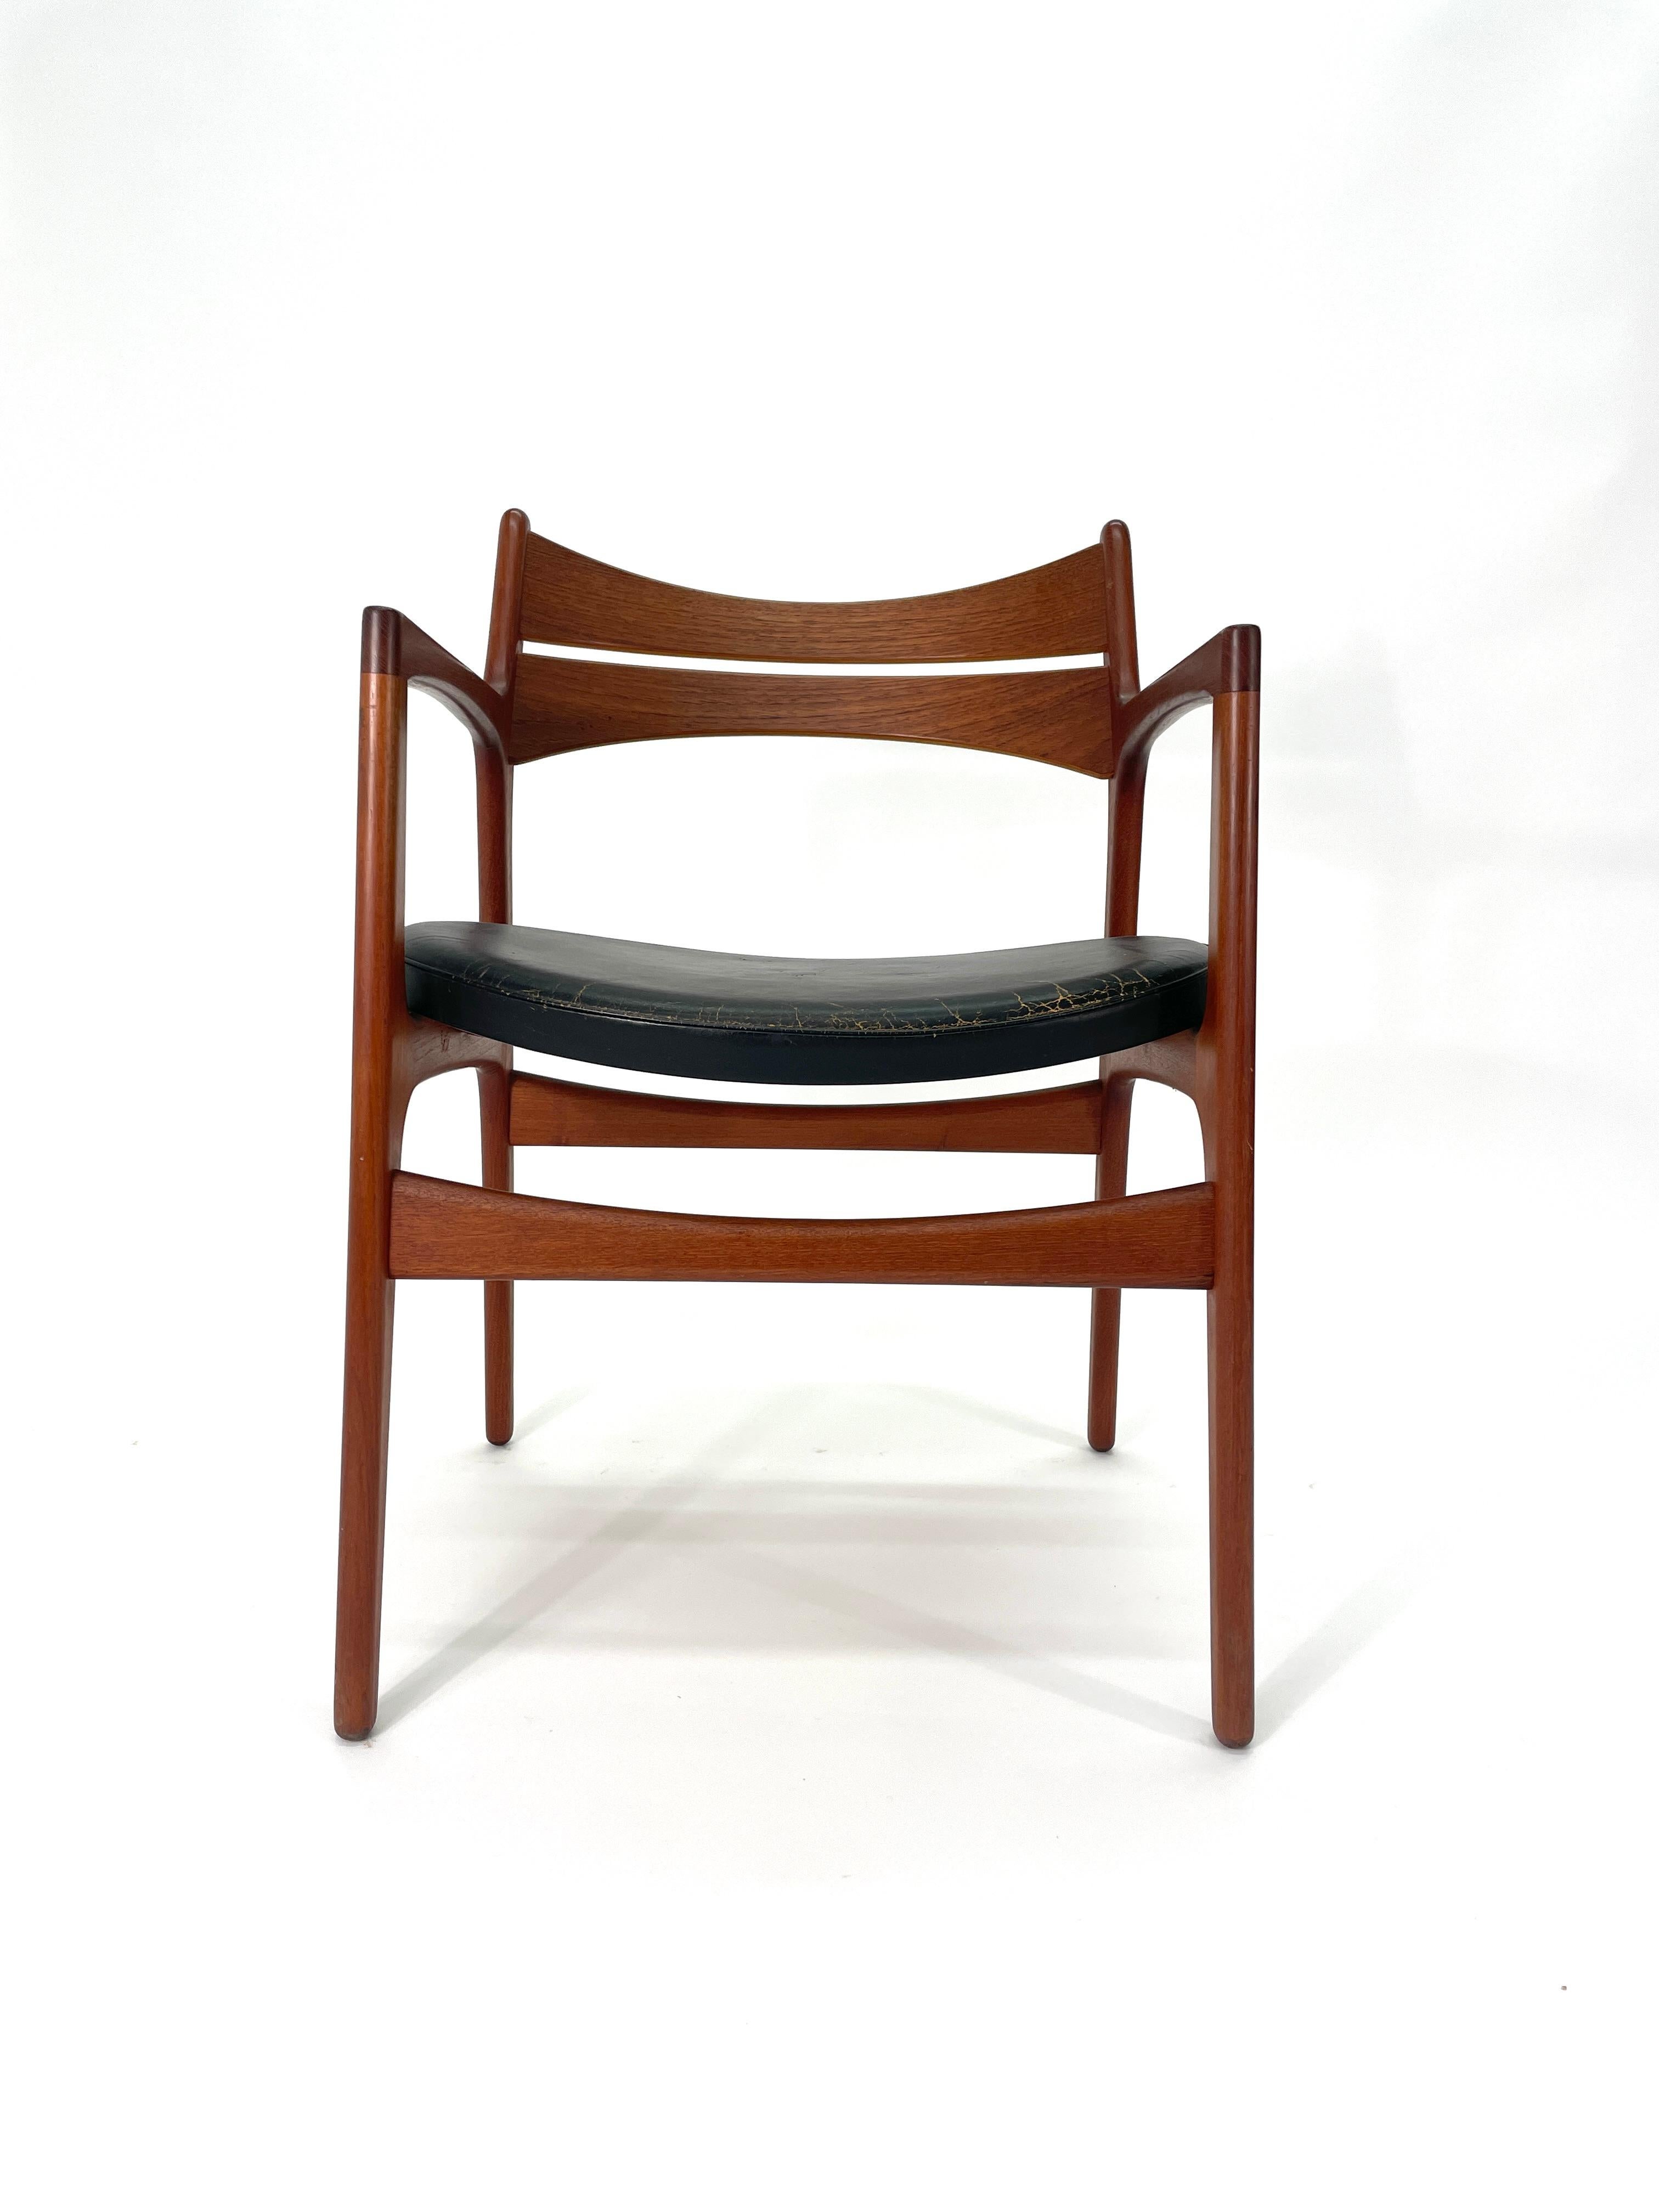 Mid-Century desk chair designed by Erick Buch for Christiansen Møbelfabrik Denmark (only one pictured). Features a solid teak frame and beautifully curved backrest that provide support and comfort. Solid wood legs feature arched cross braces for